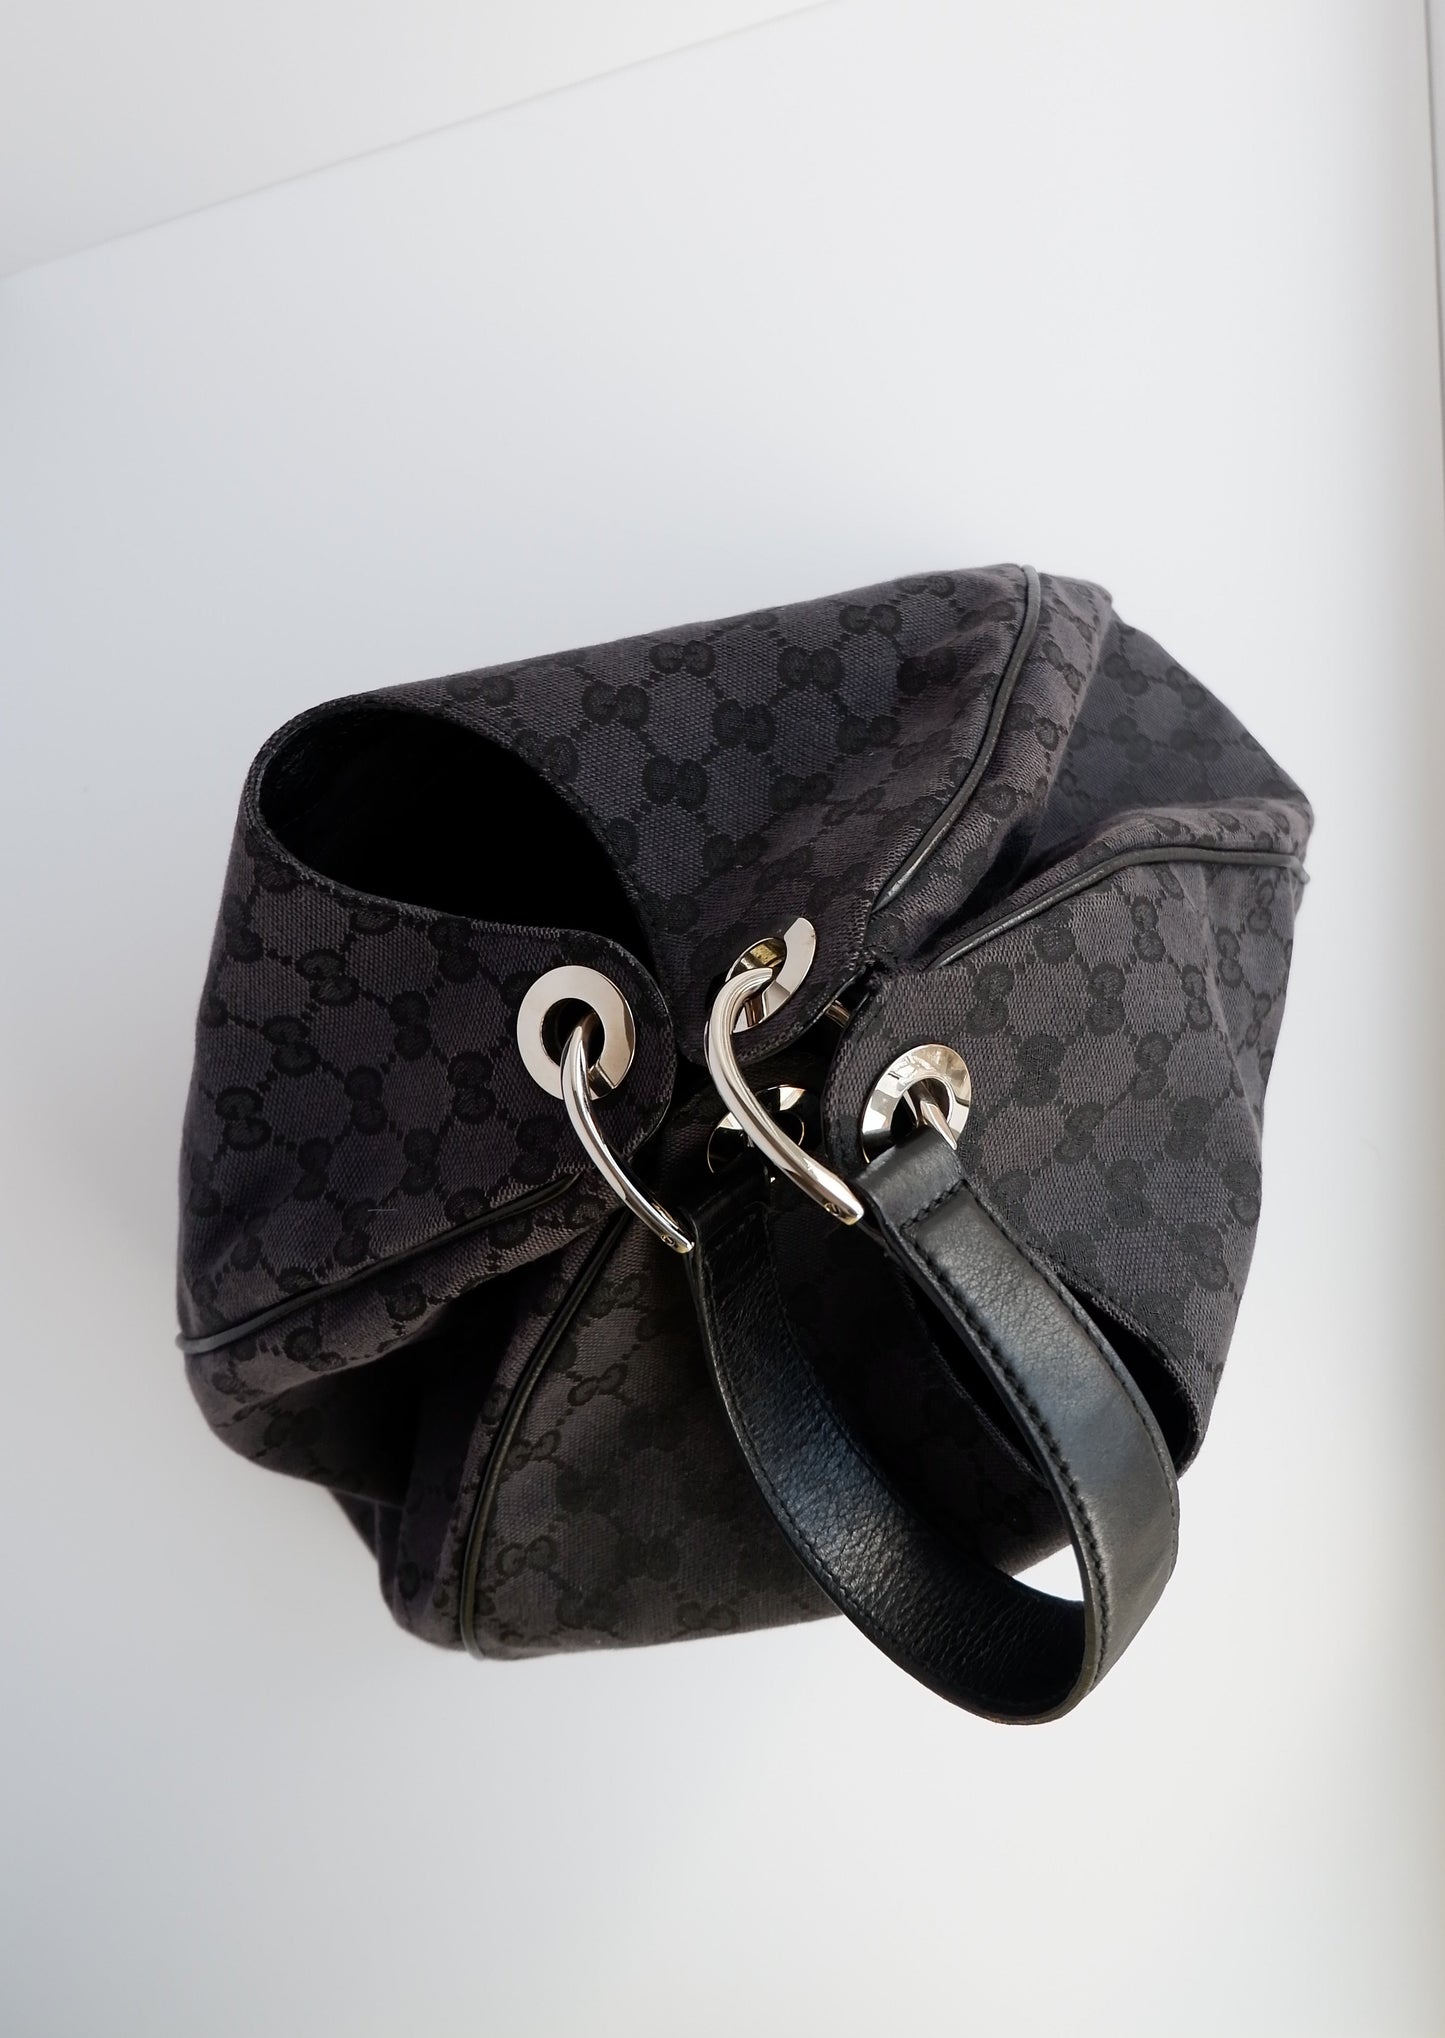 Authentic Preowned Gucci Black GG Canvas Shoulder Bag